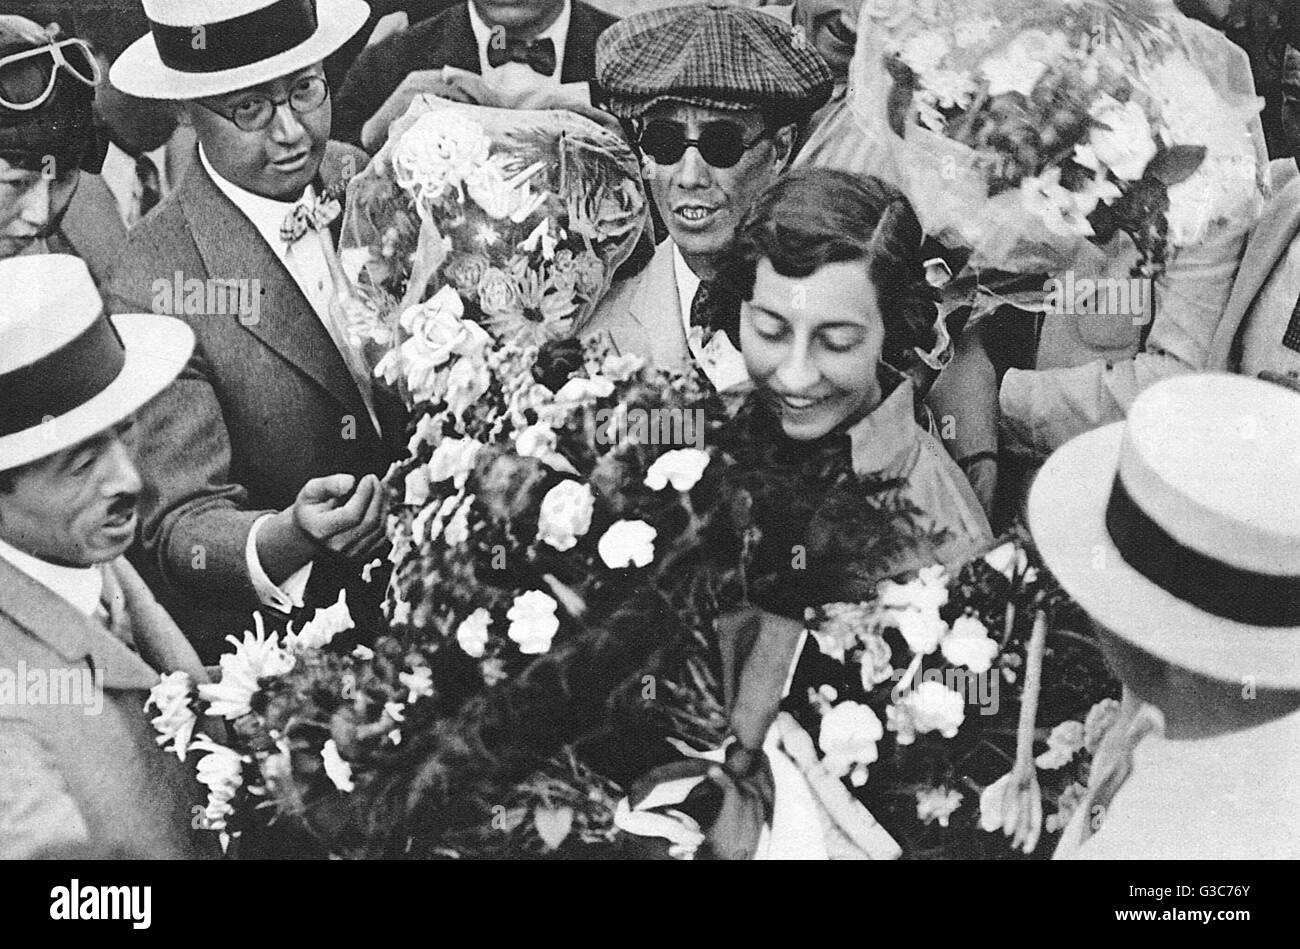 Miss Amy Johnson, the pilot, with many bouquets of flowers. She is surrounded by men, many of which wearing straw boater hats.      Date: 1932 Stock Photo